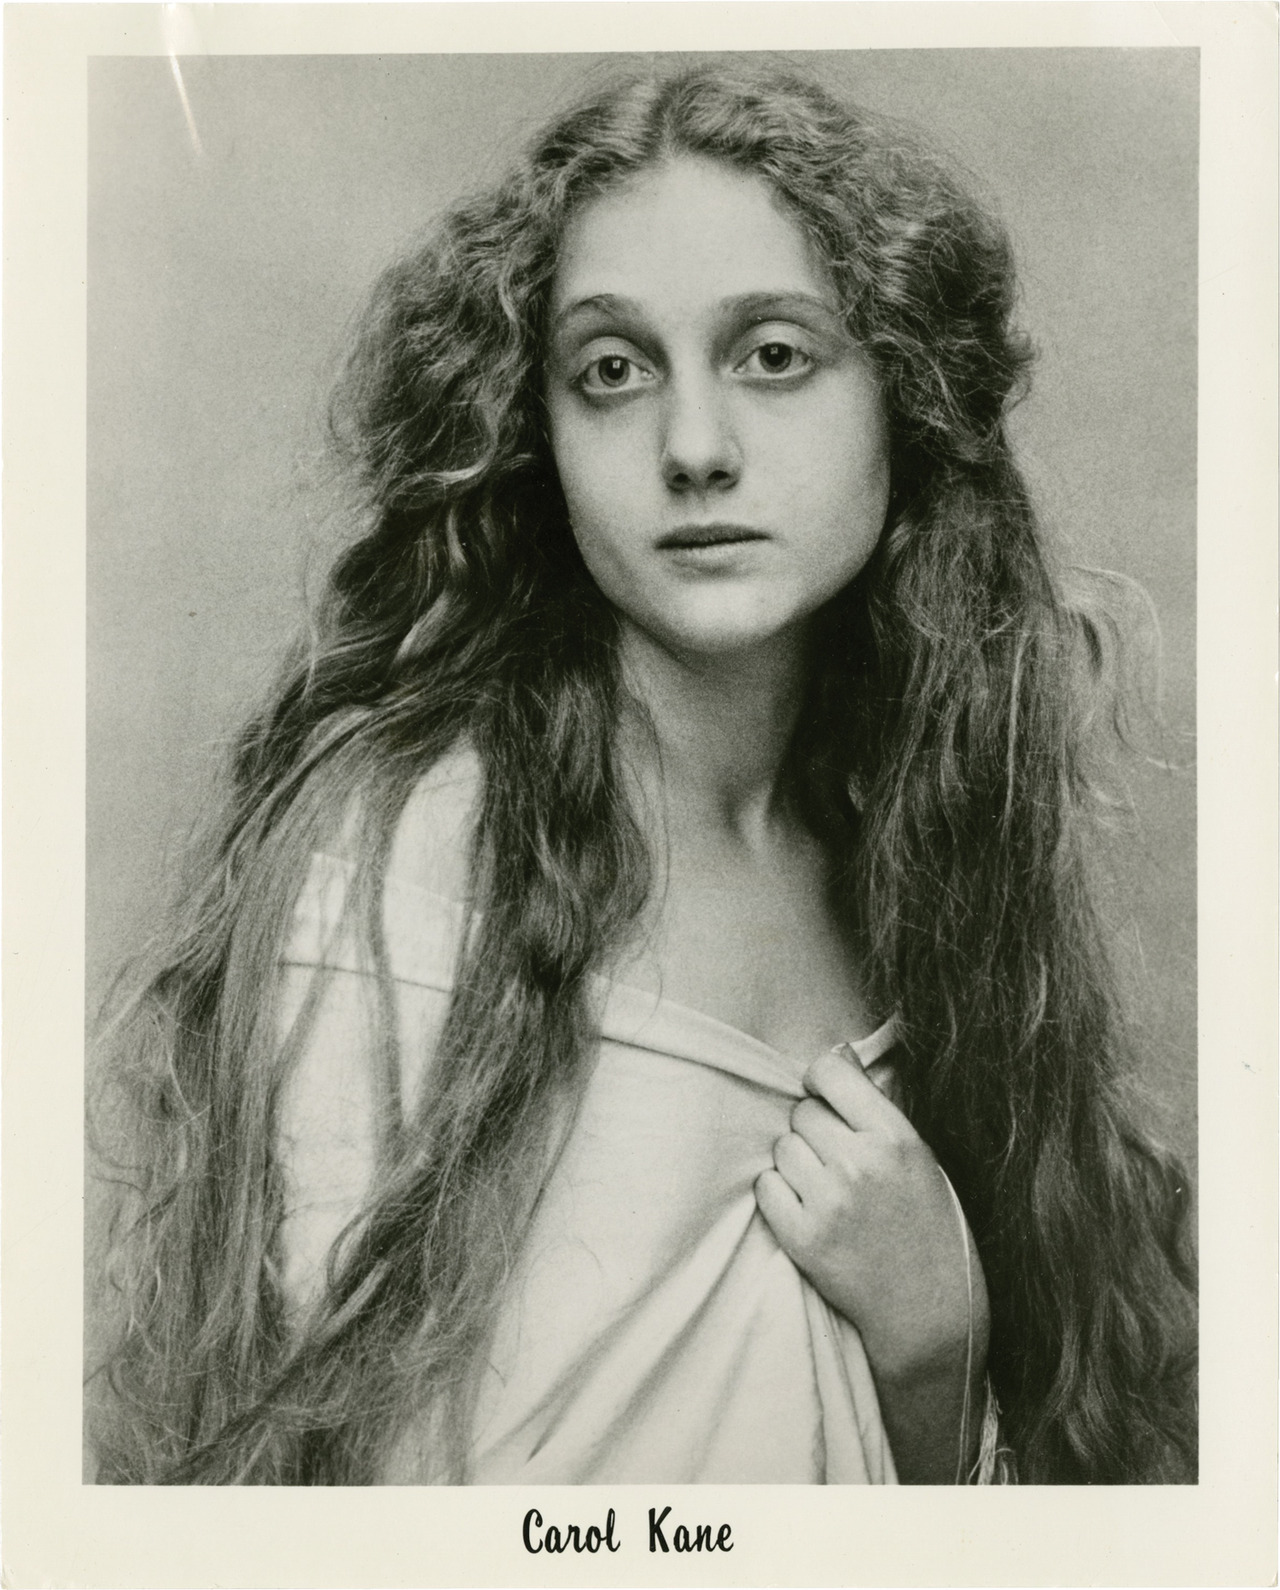 20thcenturyfoxcontractplayer: Carol Kane, 1976 An agency memo on the verso of the